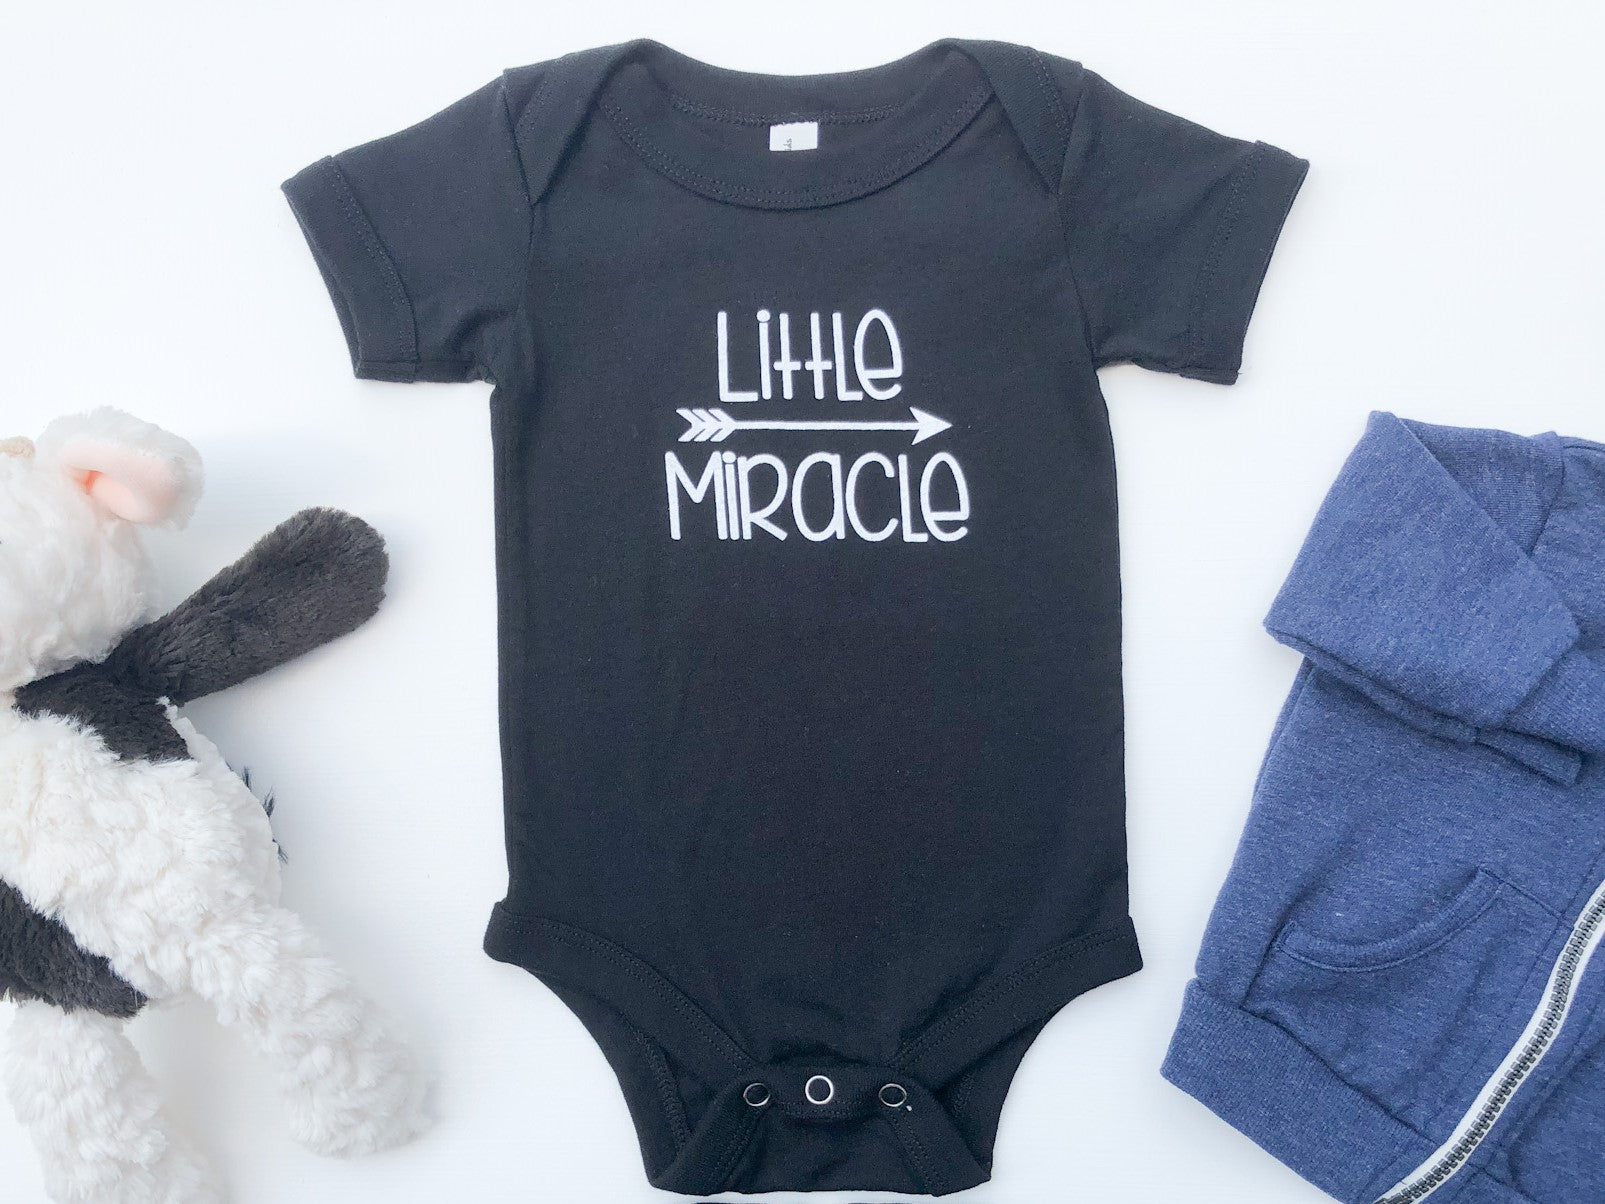 Black baby bodysuit with the text Little Miracle